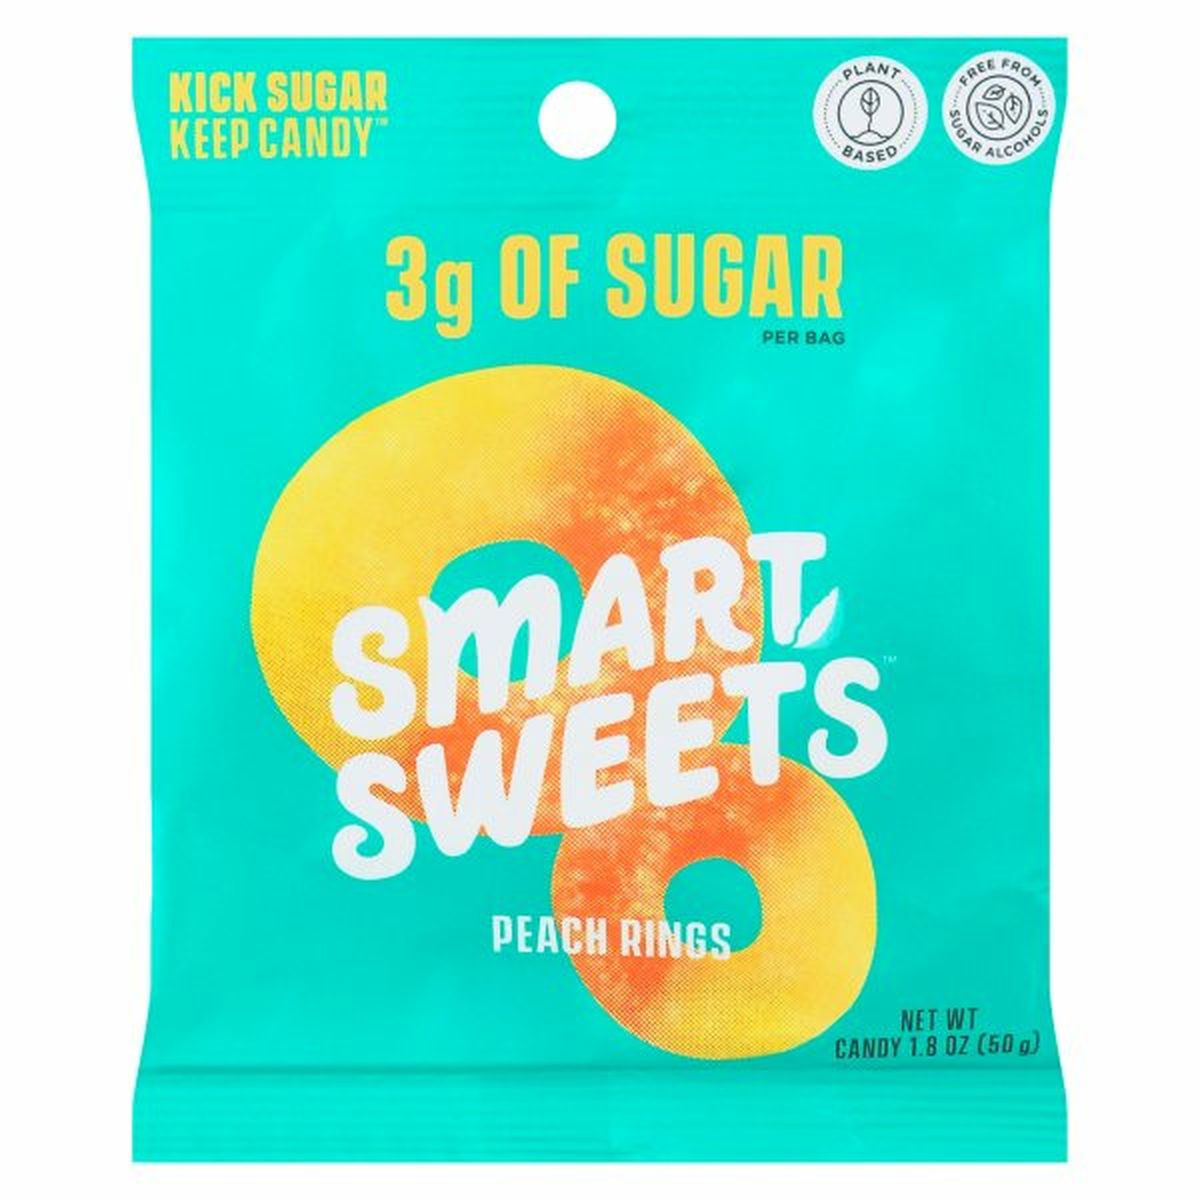 Calories in SmartSweets Candy, Peach Rings